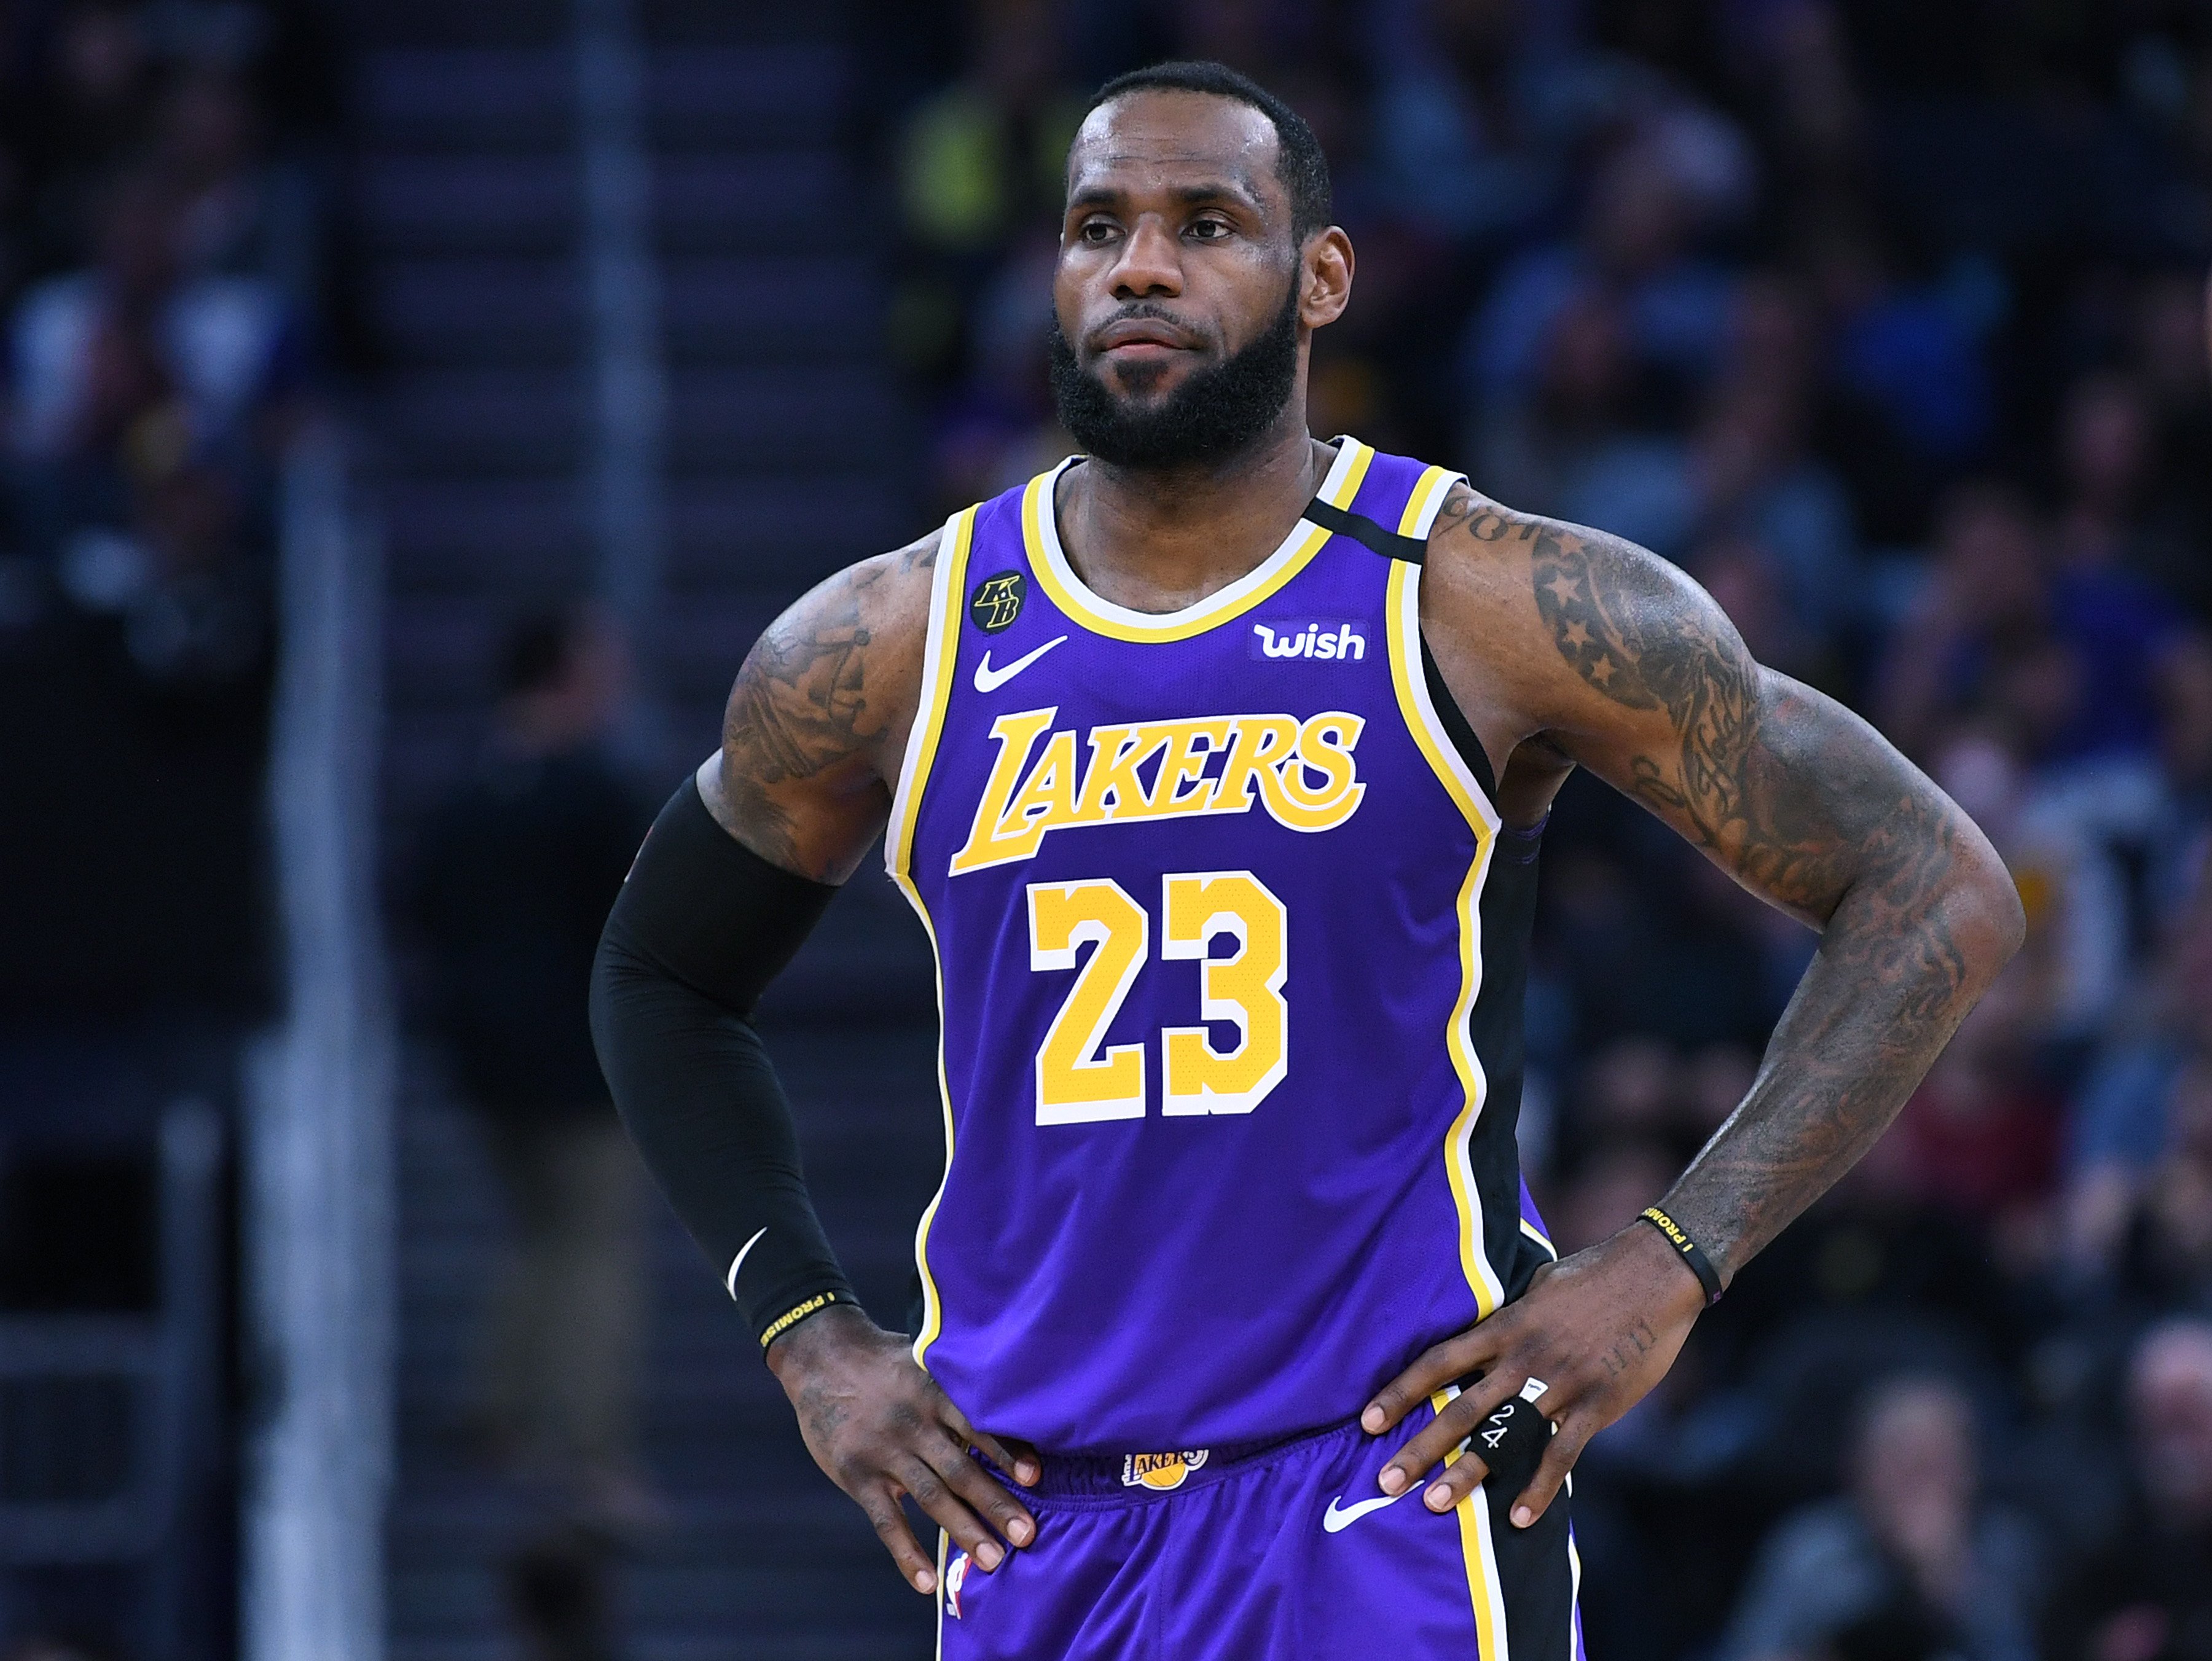 LeBron James #23 of the Los Angeles Lakers during an NBA basketball game at Chase Center on February 08, 2020, in San Francisco, California. | Source: Getty Images.